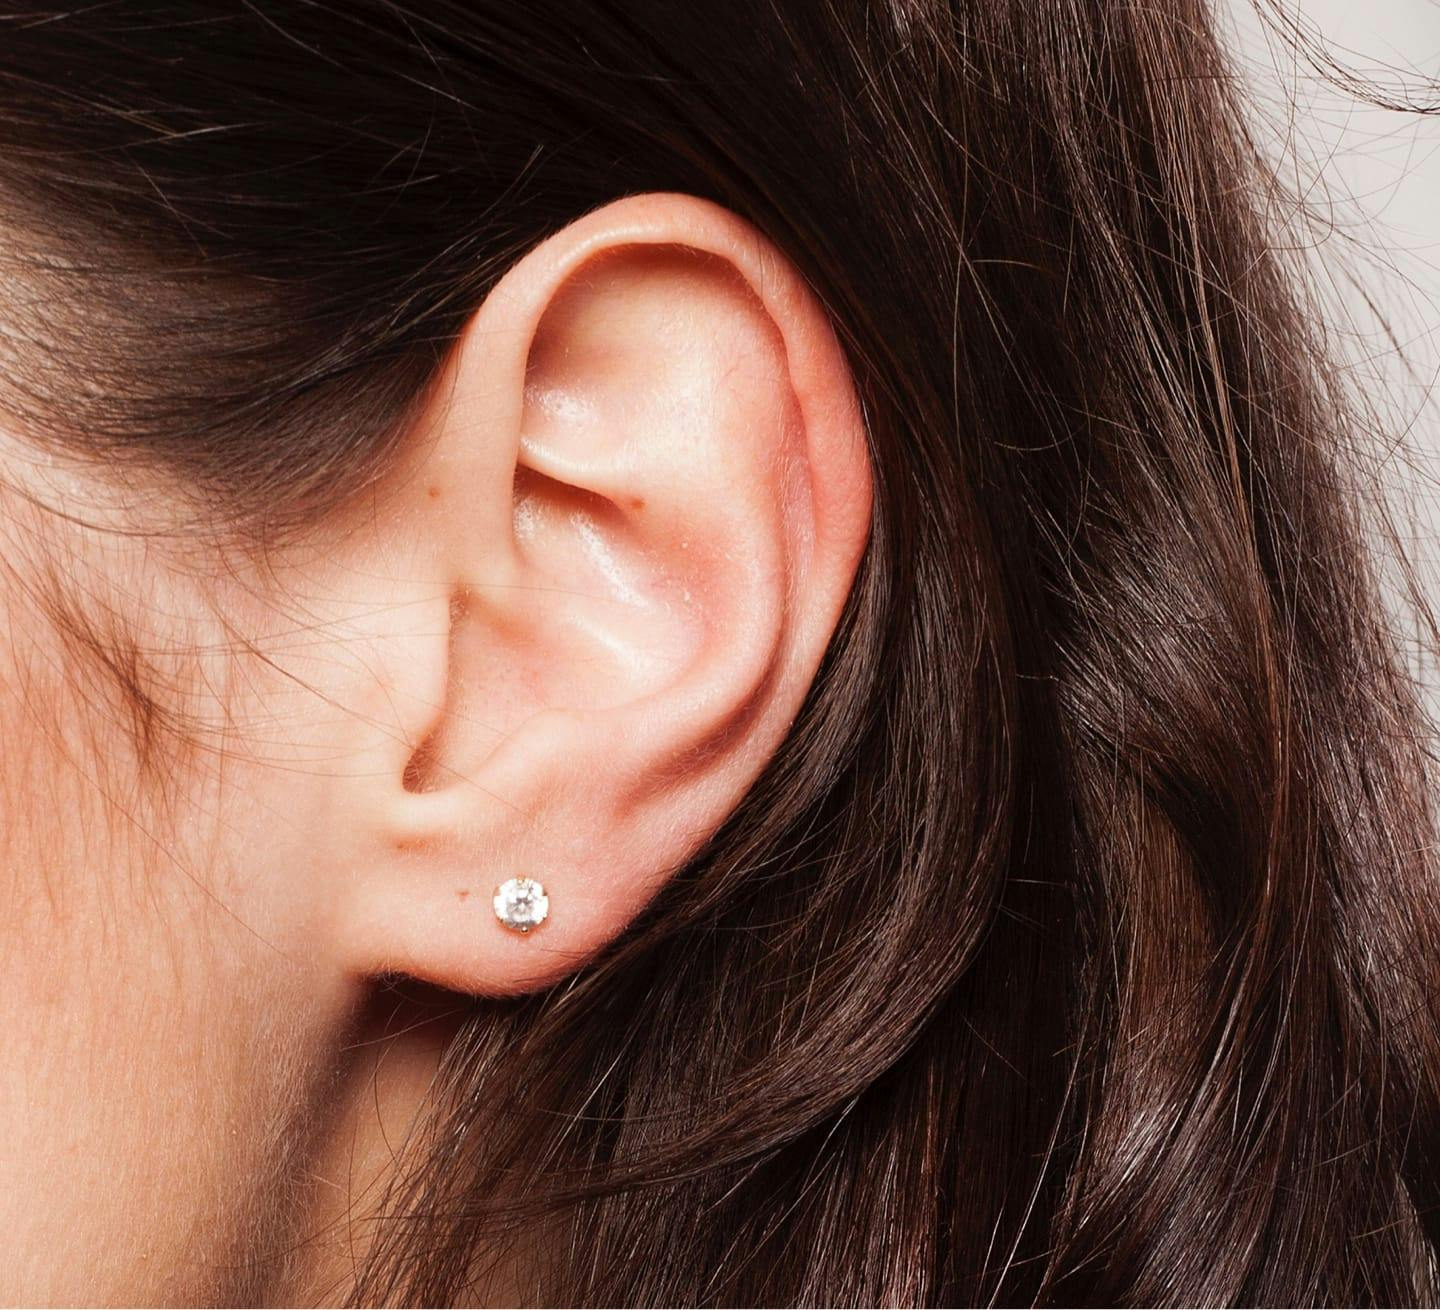 Greer Plastic Surgery - Did you know filler is a nifty little way to  correct droopy earrings? Earlobes lose volume as we age, meaning your  earrings may look droopy or saggy. Here